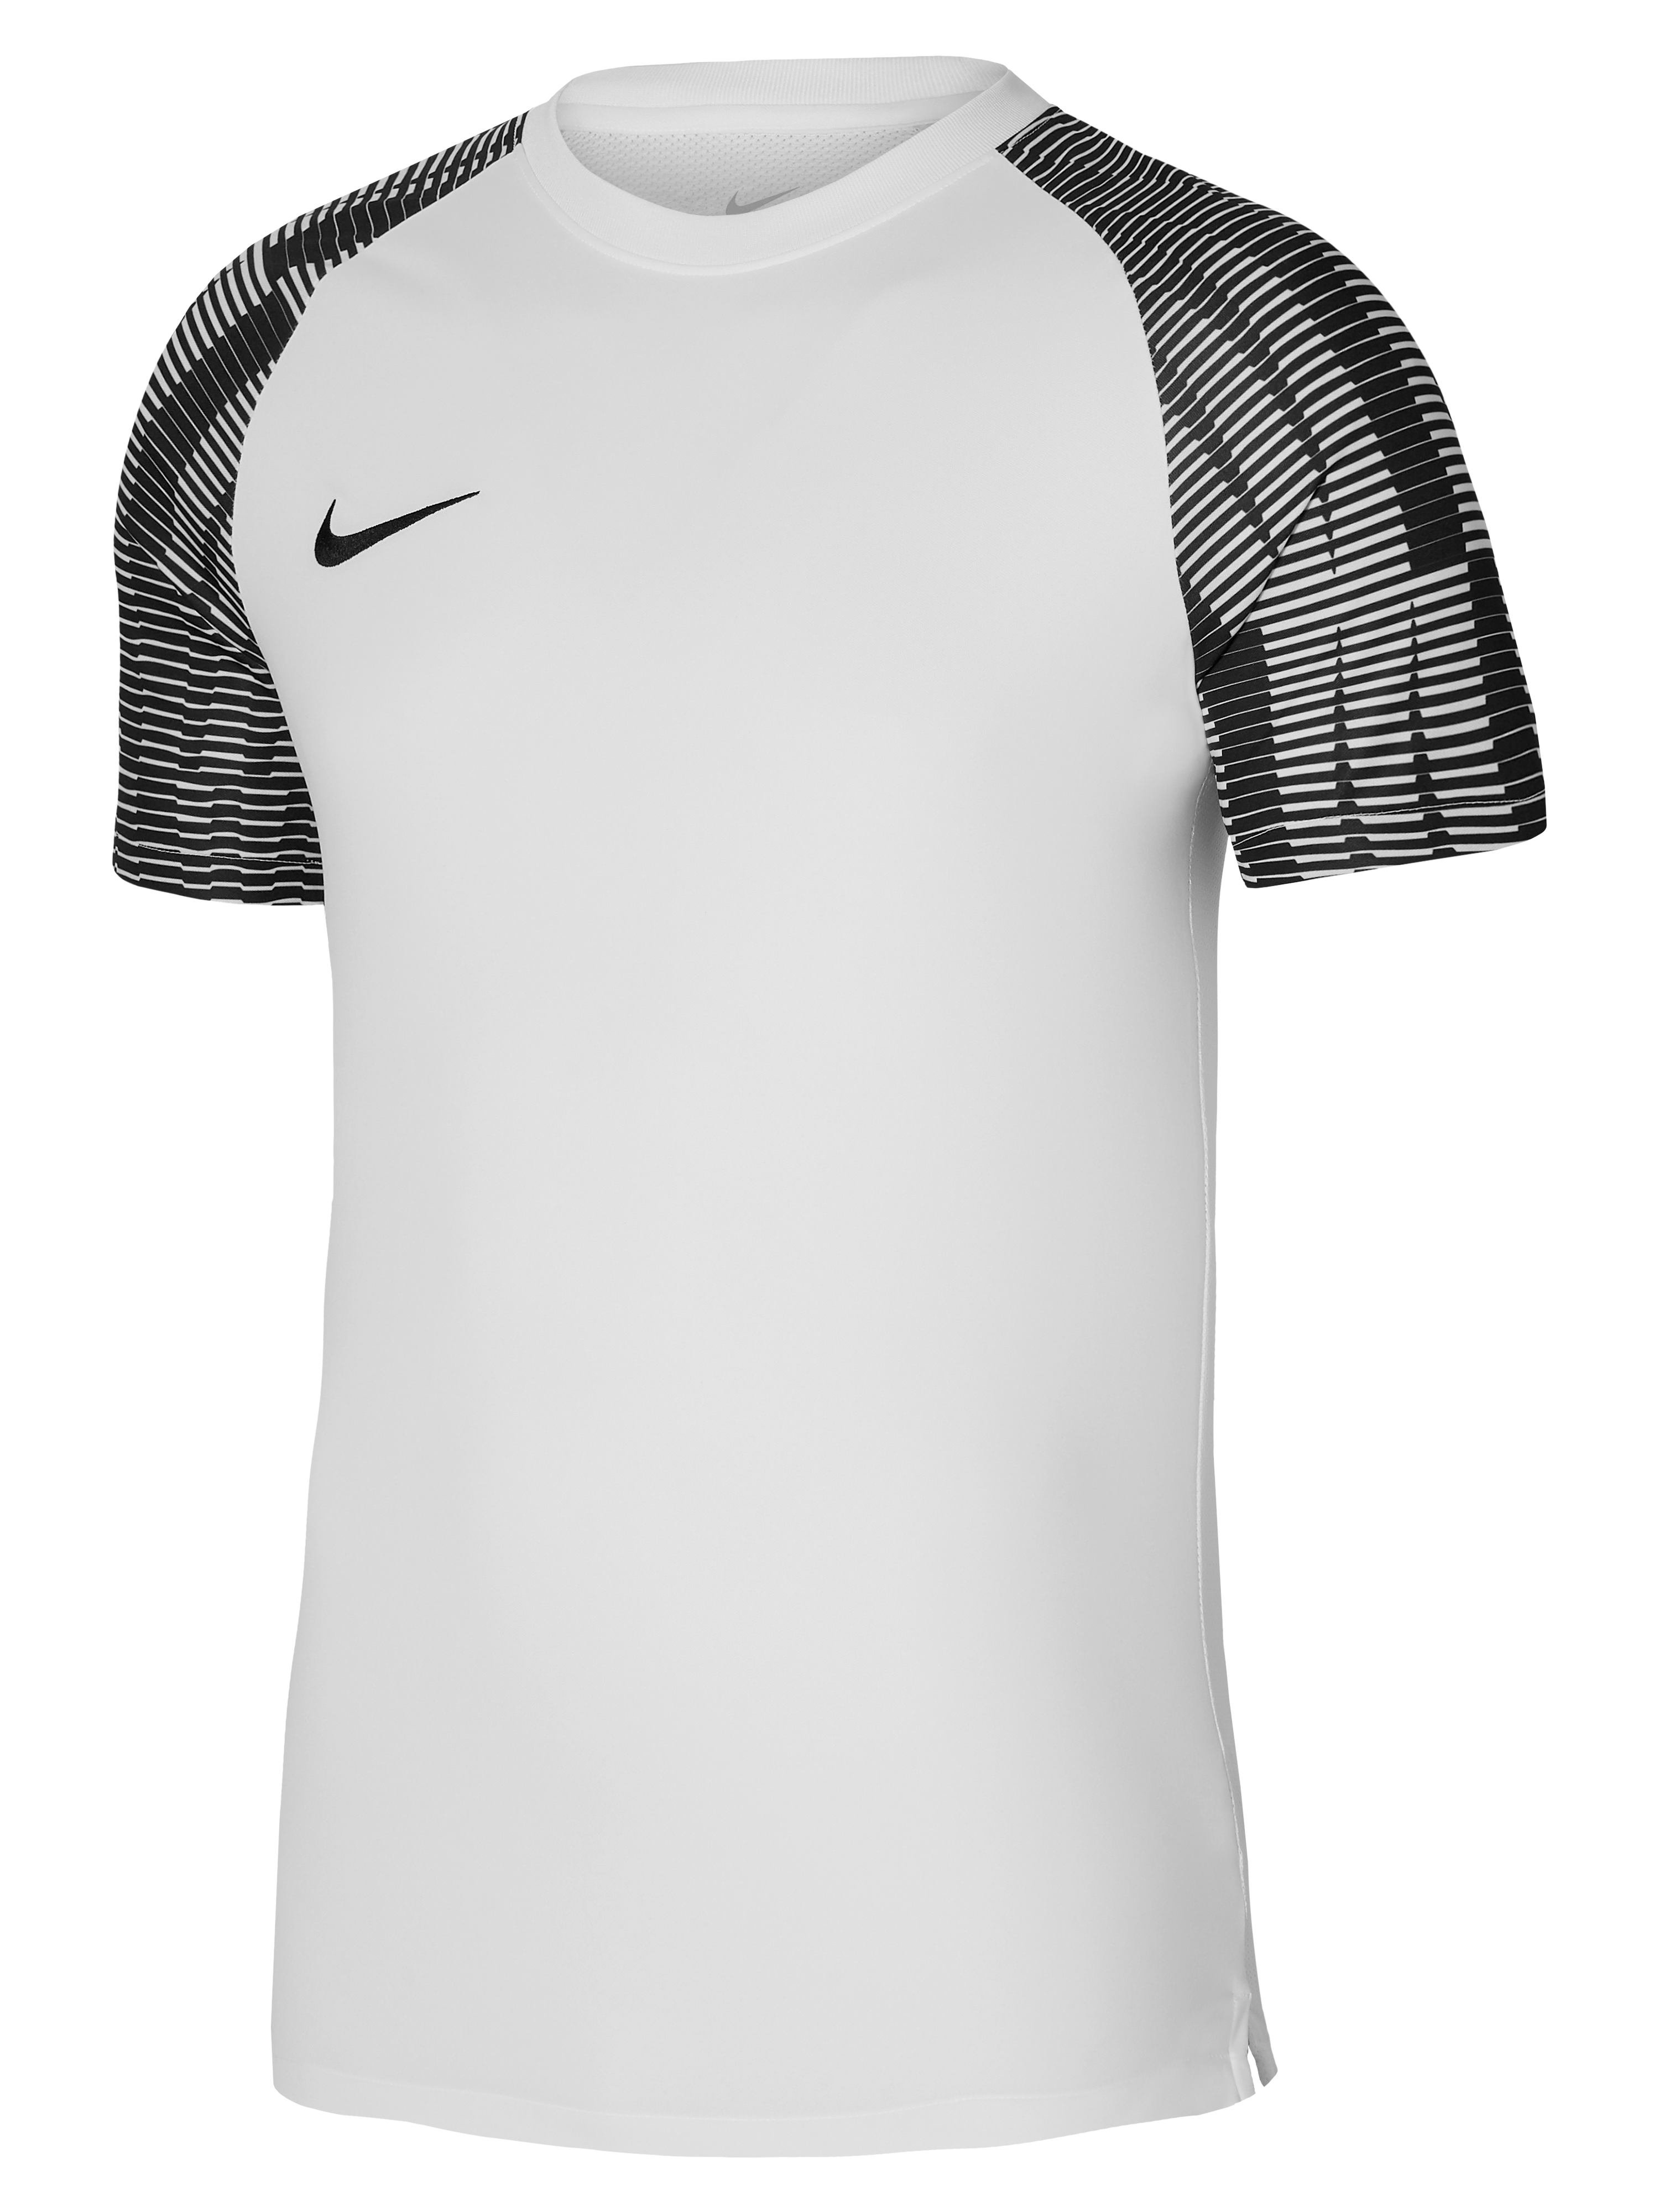 Clifton All Whites - Academy Jersey